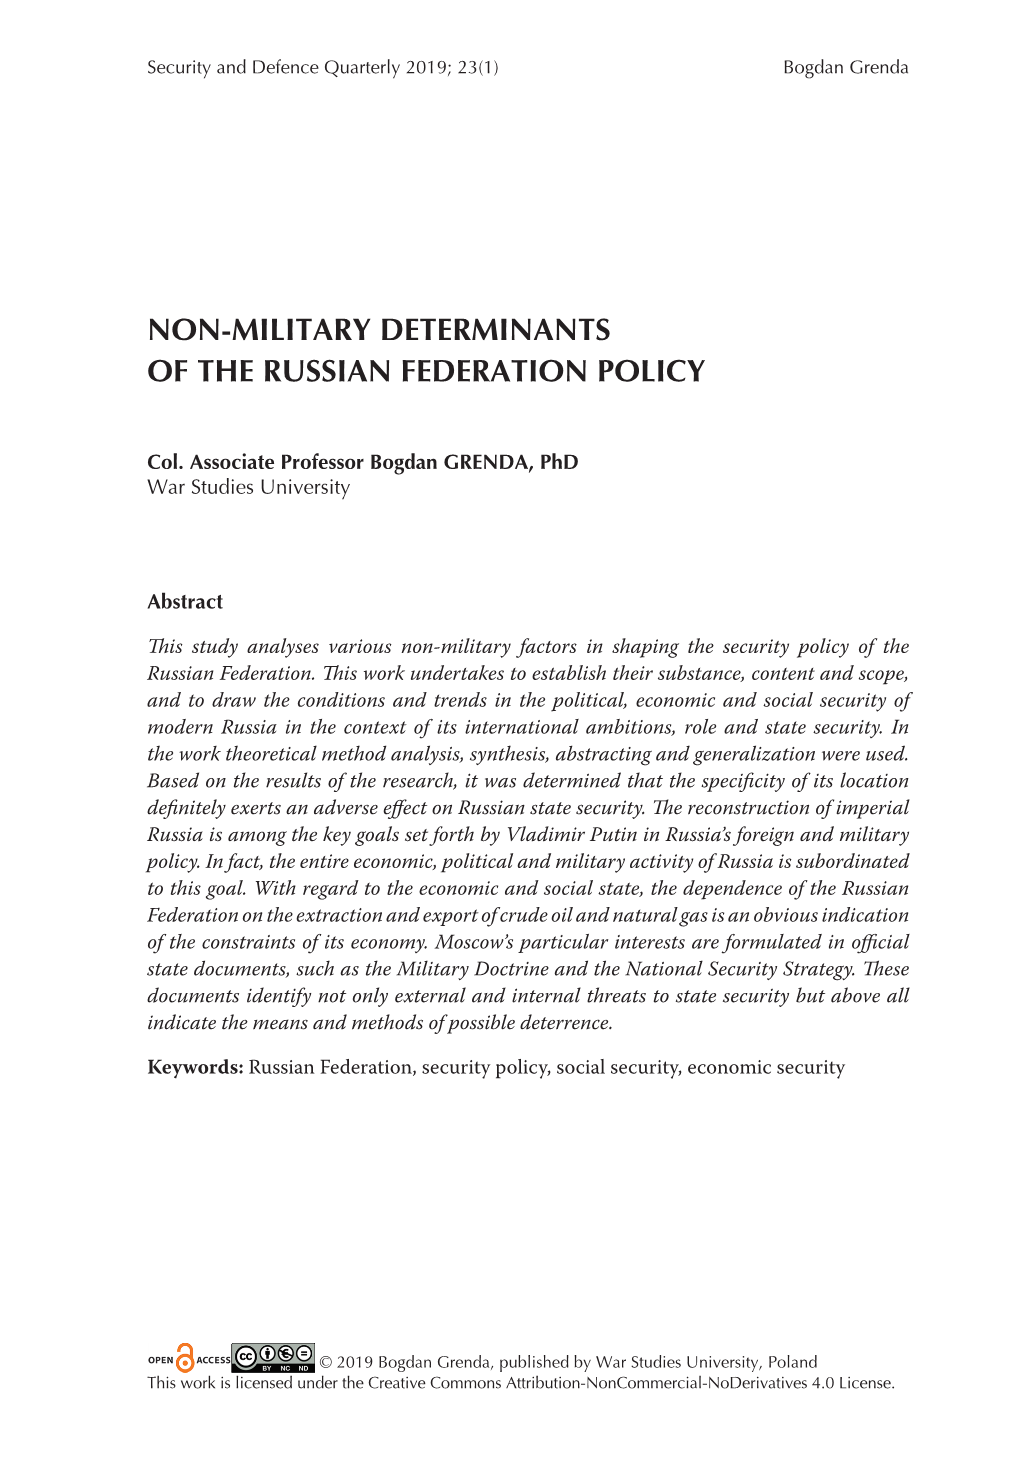 Non-Military Determinants of the Russian Federation Policy